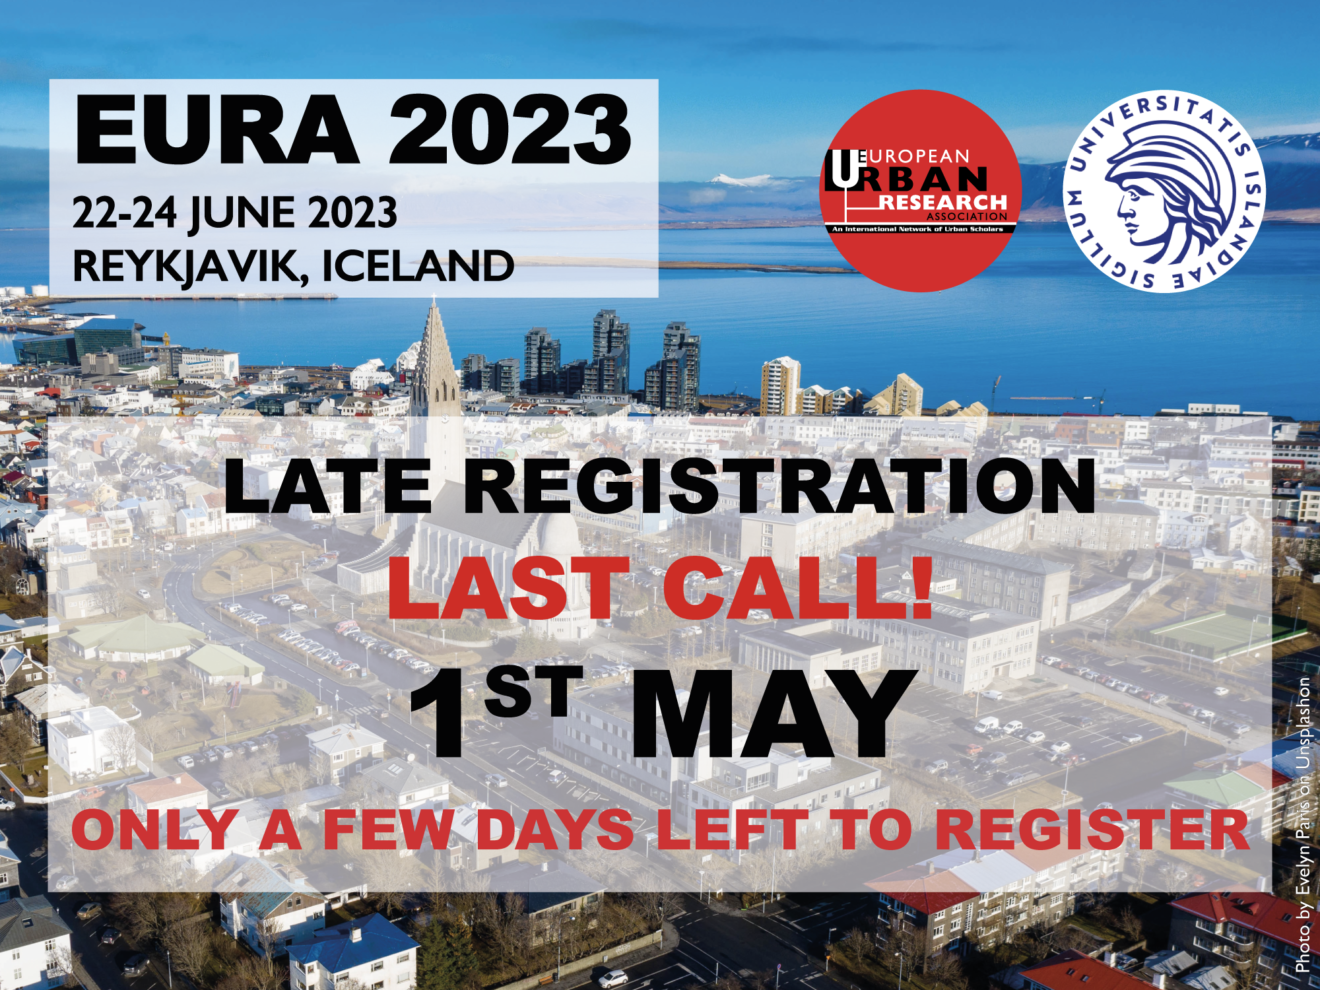 EURA 2023 - Late registration is closing soon